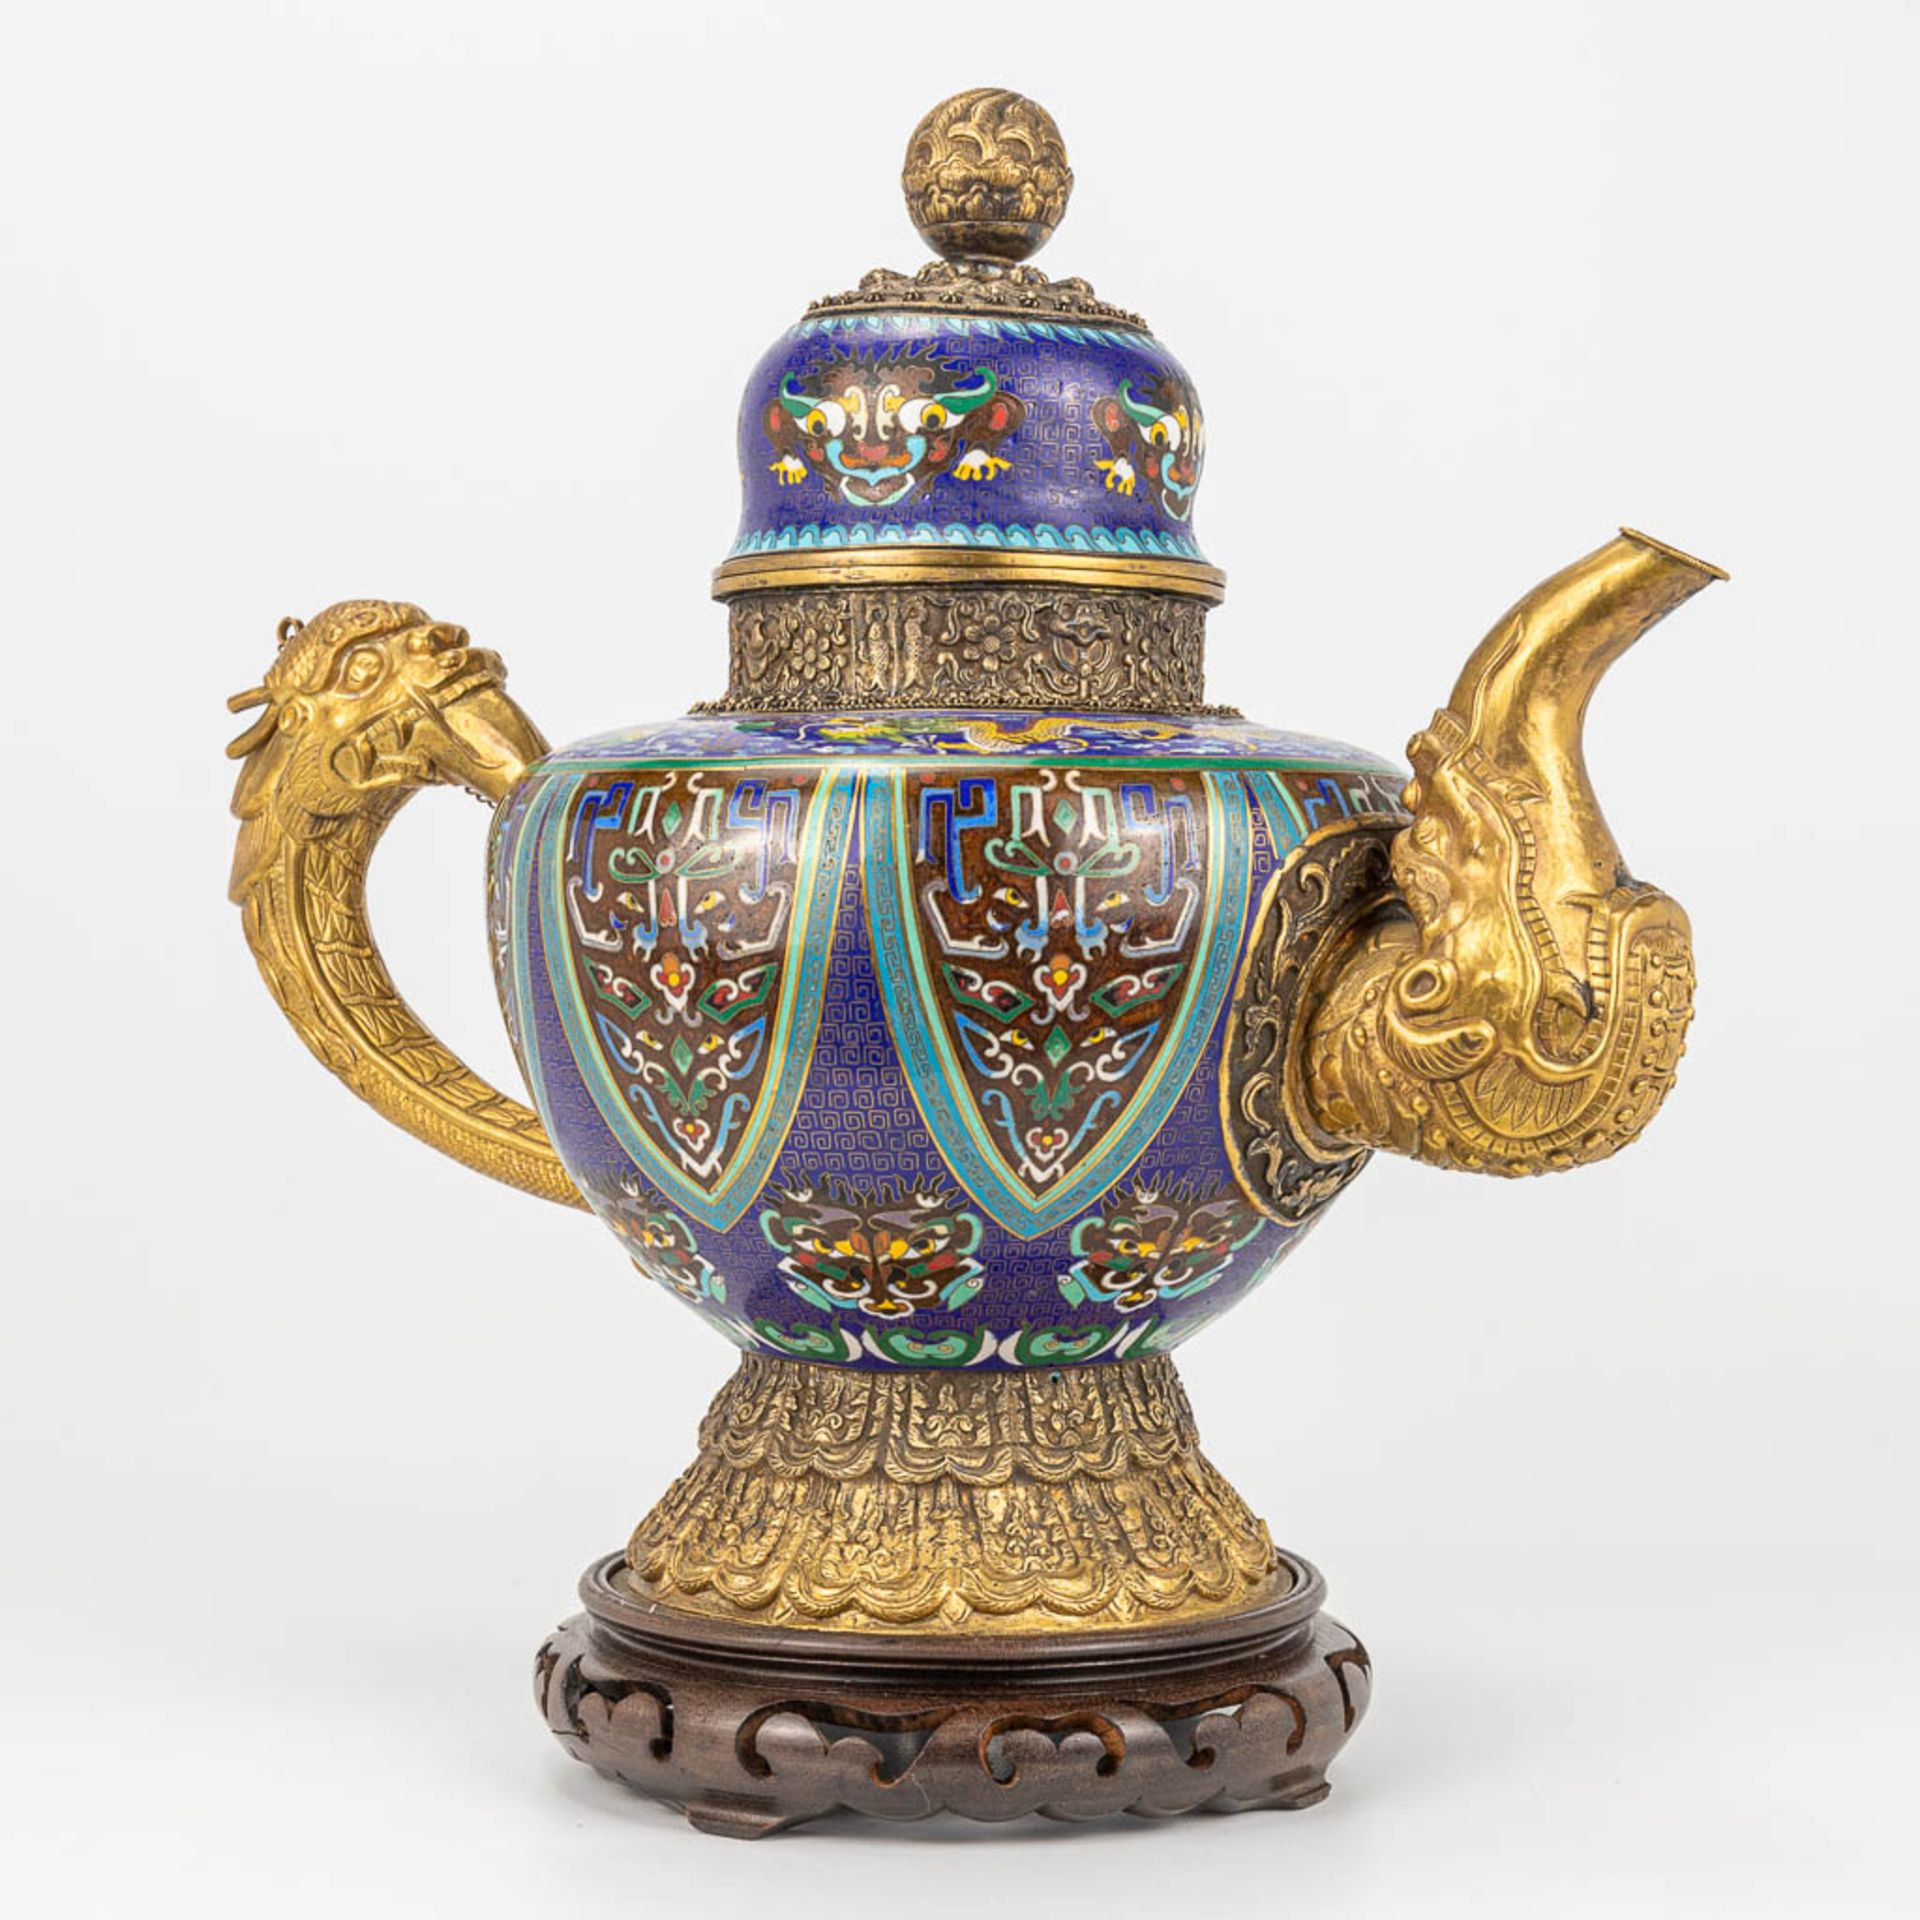 A Tibetan ceremonial ewer made of gilt bronze and finished with cloisonnŽ bronze. - Image 9 of 18